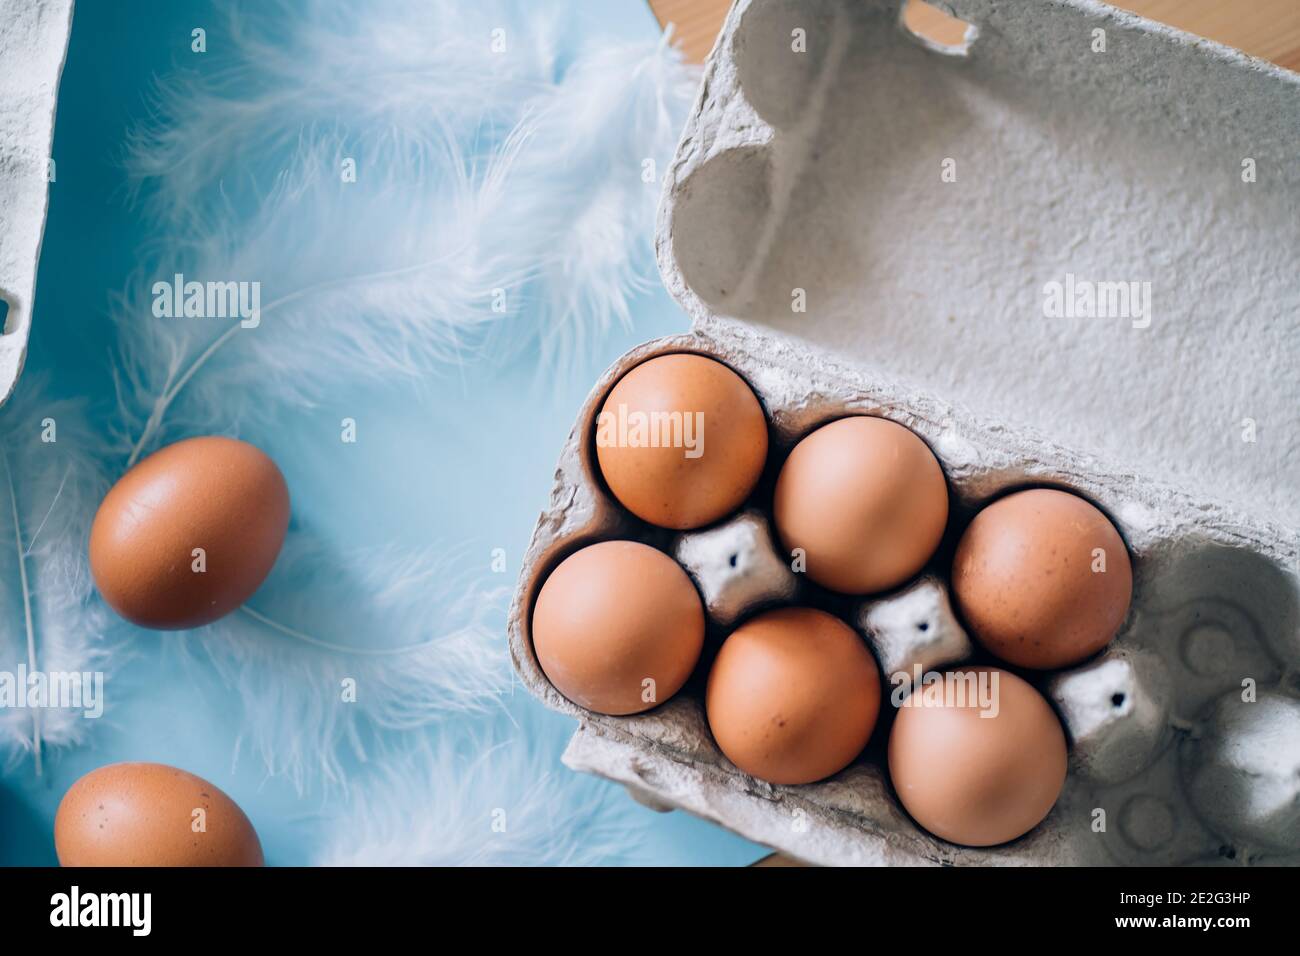 Raw fresh brown chicken eggs and white fluffy birds feathers on light blue background. Selective focus. Organic food, healthy eating, dieting, farm pr Stock Photo